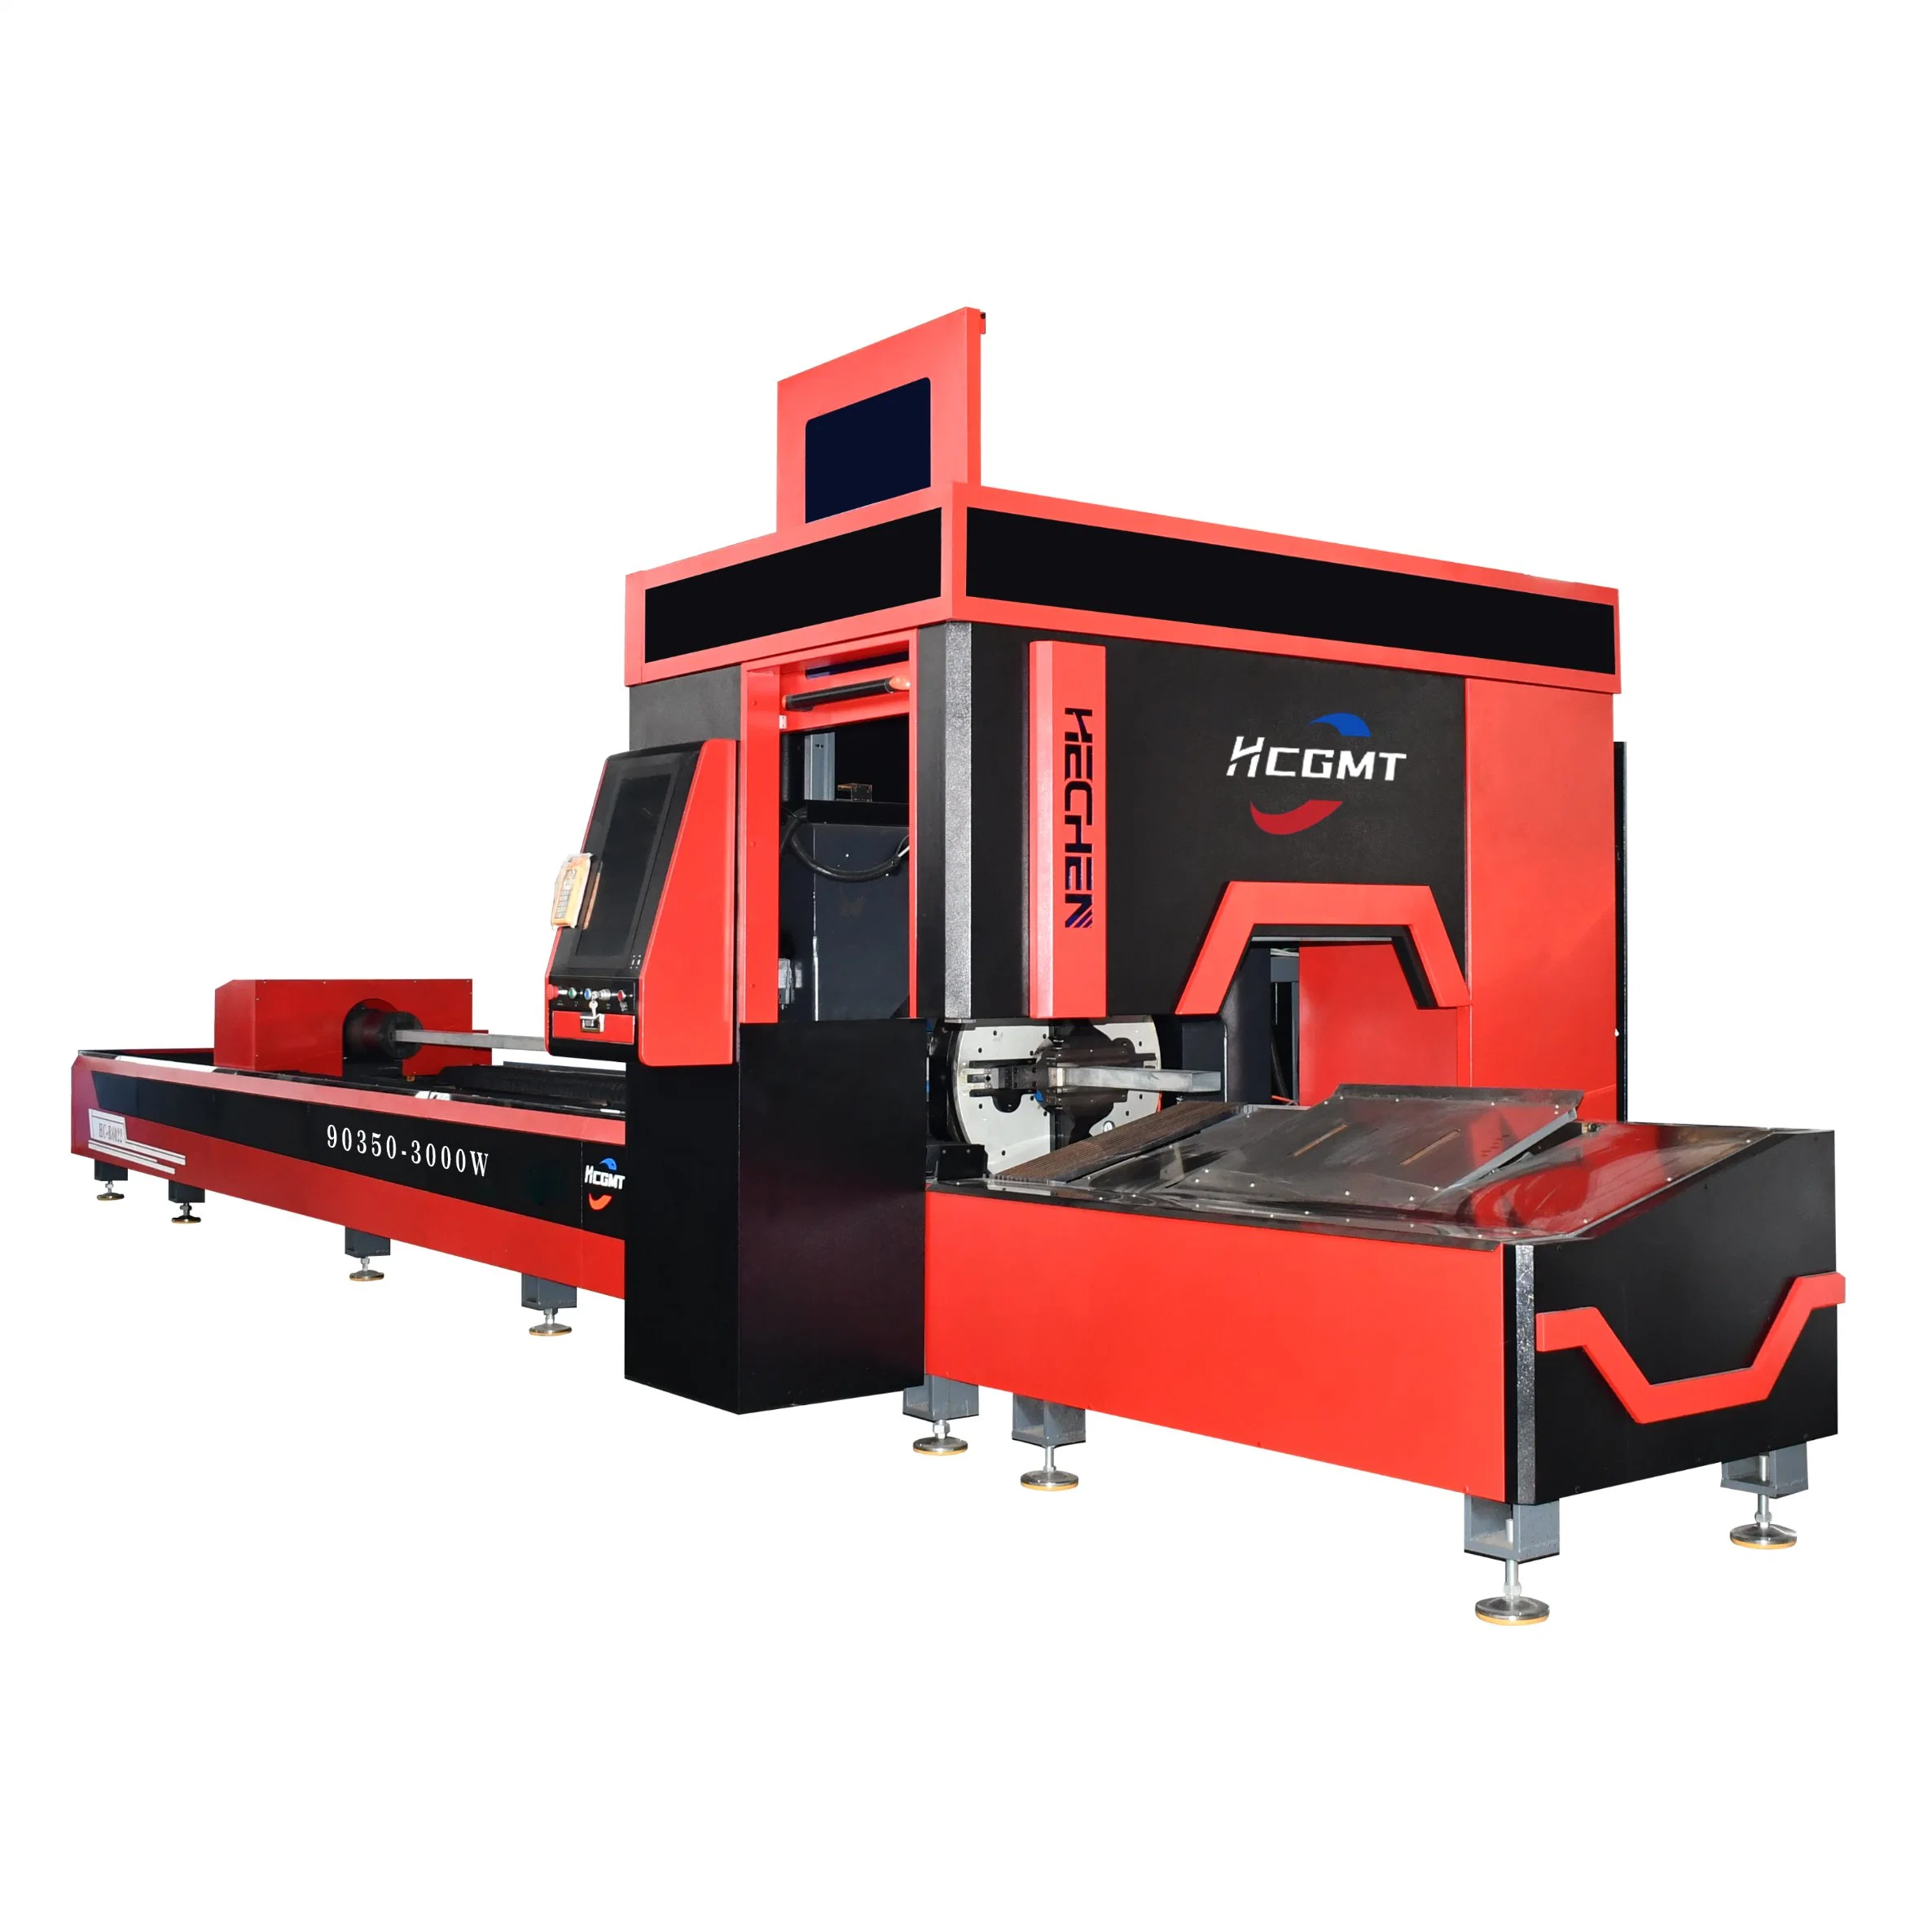 Hcgmt&reg; 3000W/350mm/9m Laser Cutting Metal Tube Machine with Auto-Feeding for Mass Production